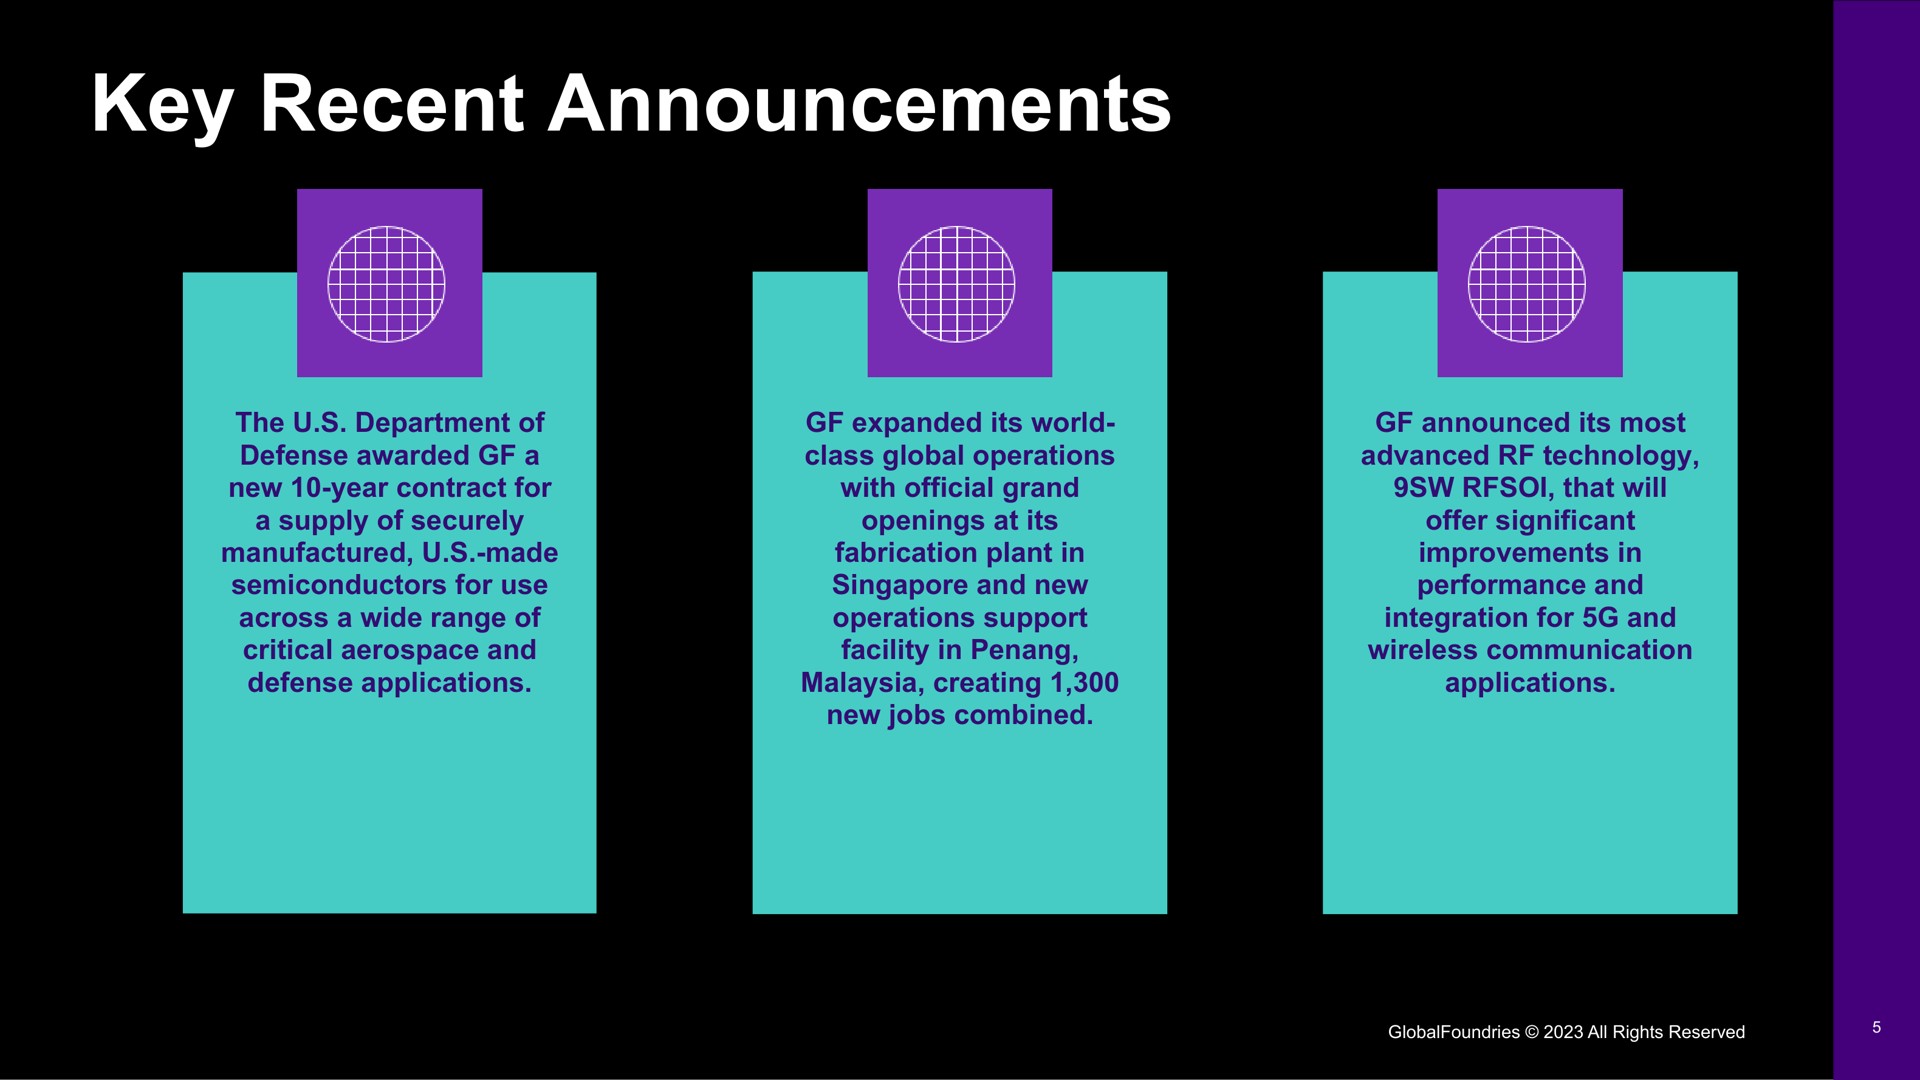 key recent announcements | GlobalFoundries